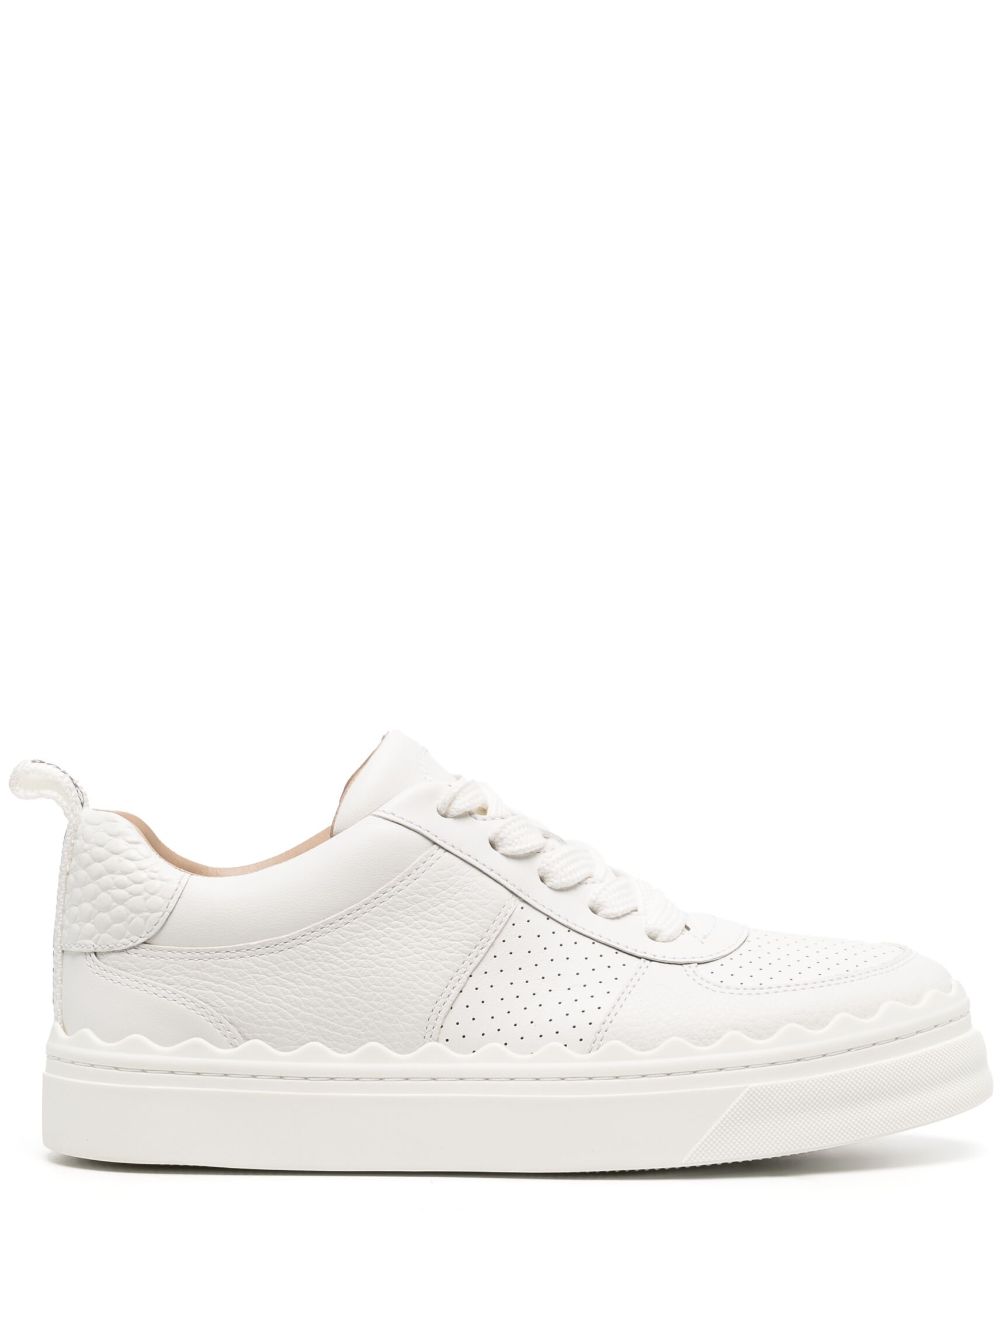 Chloé Lace-up Leather Sneakers In White